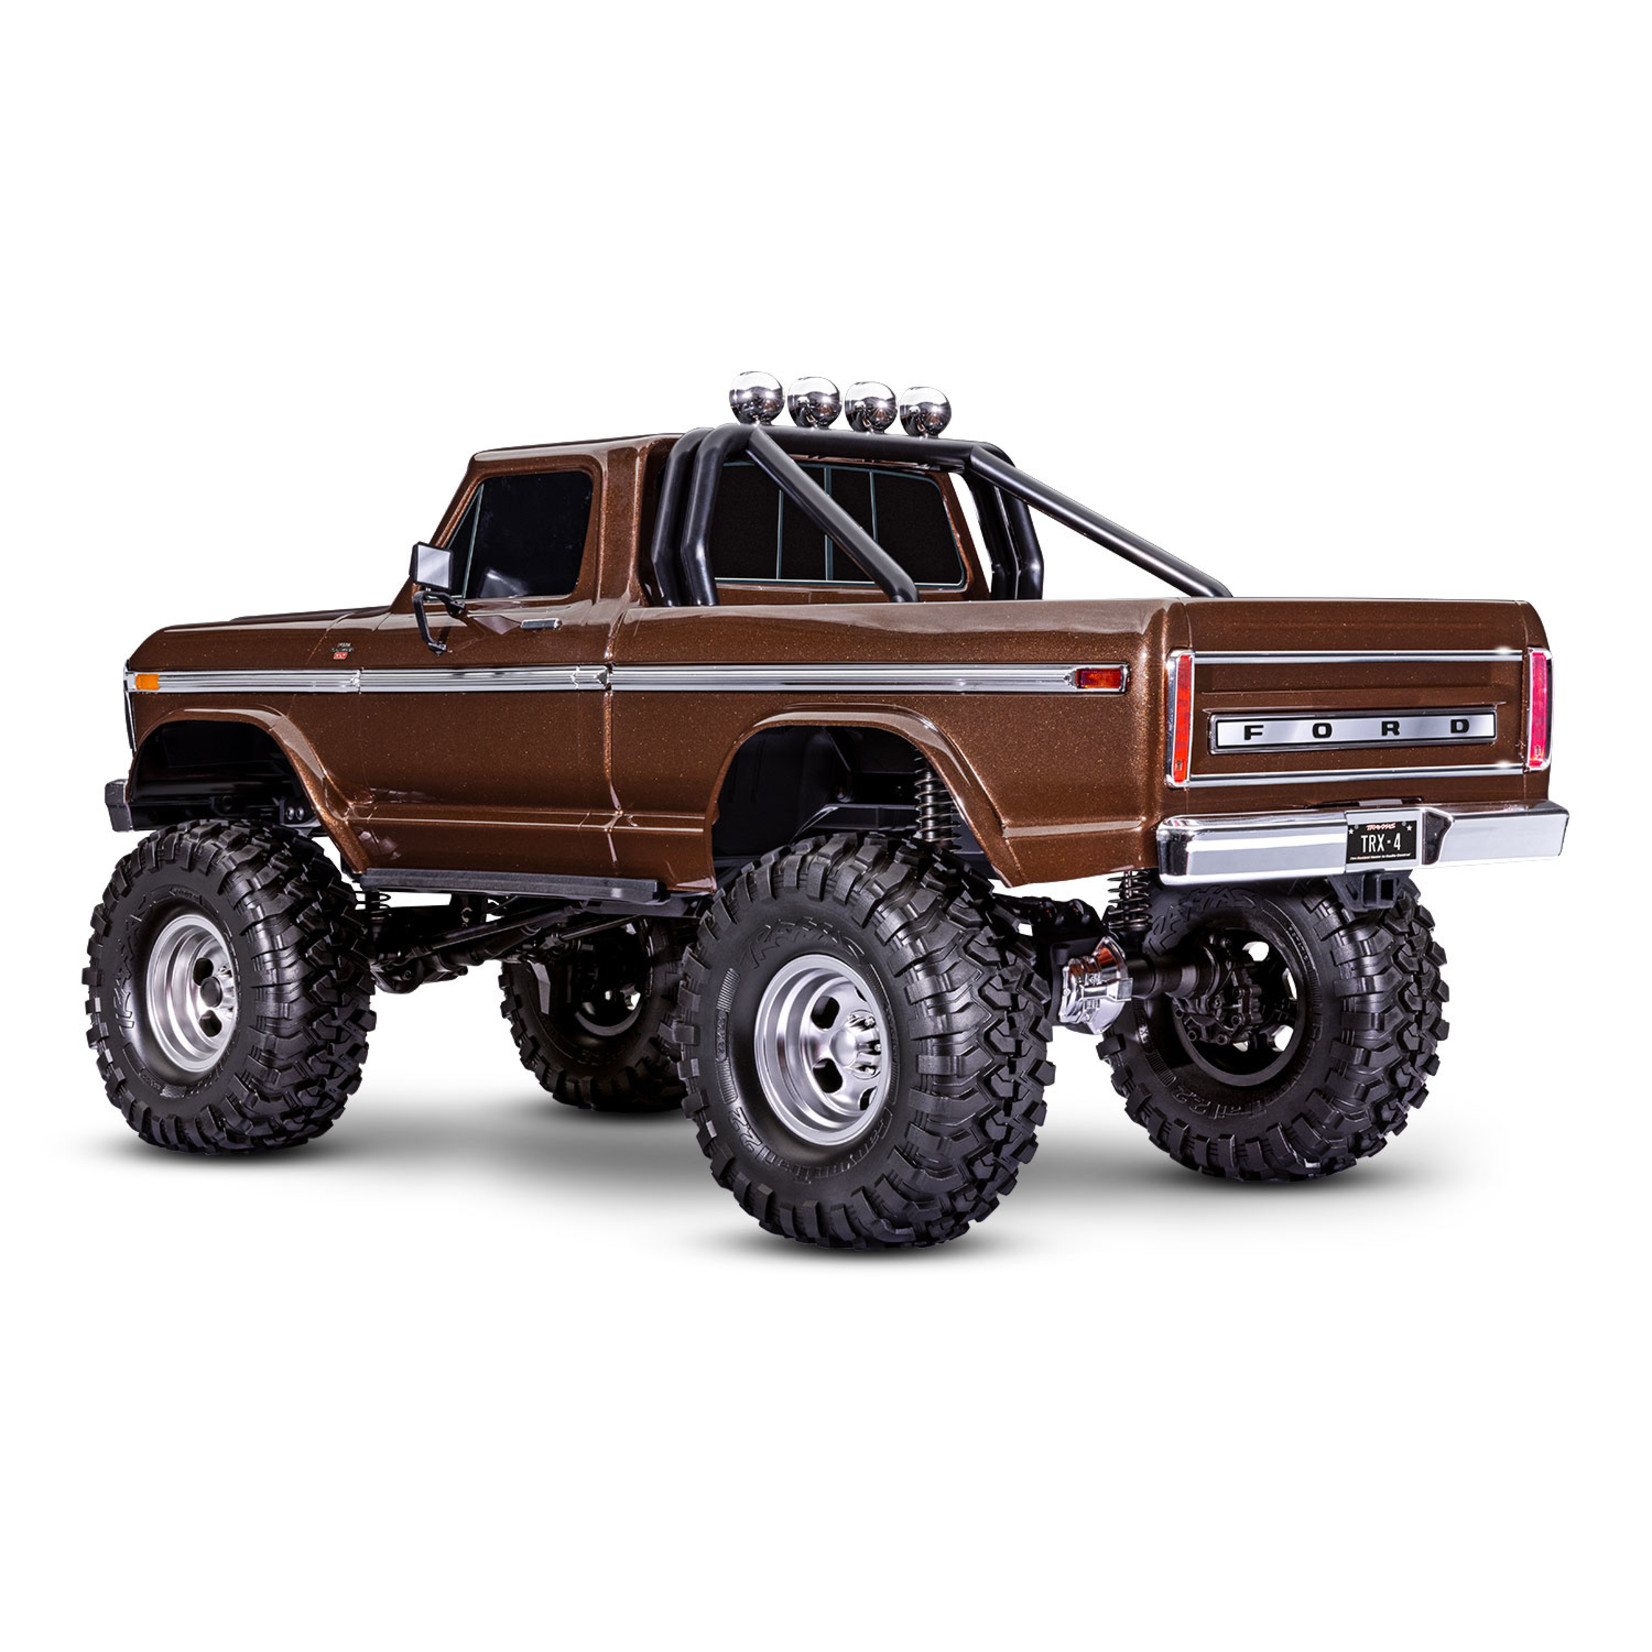 Traxxas TRX-4 Ford F-150 Ranger XLT High Trail Edition (Blue): 1/10 Scale 4X4 Trail Truck, Ready-To-Drive®, with TQi™ 2.4GHz 4-channel Radio System, XL-5 HV Speed Control.  Needs battery and charger.